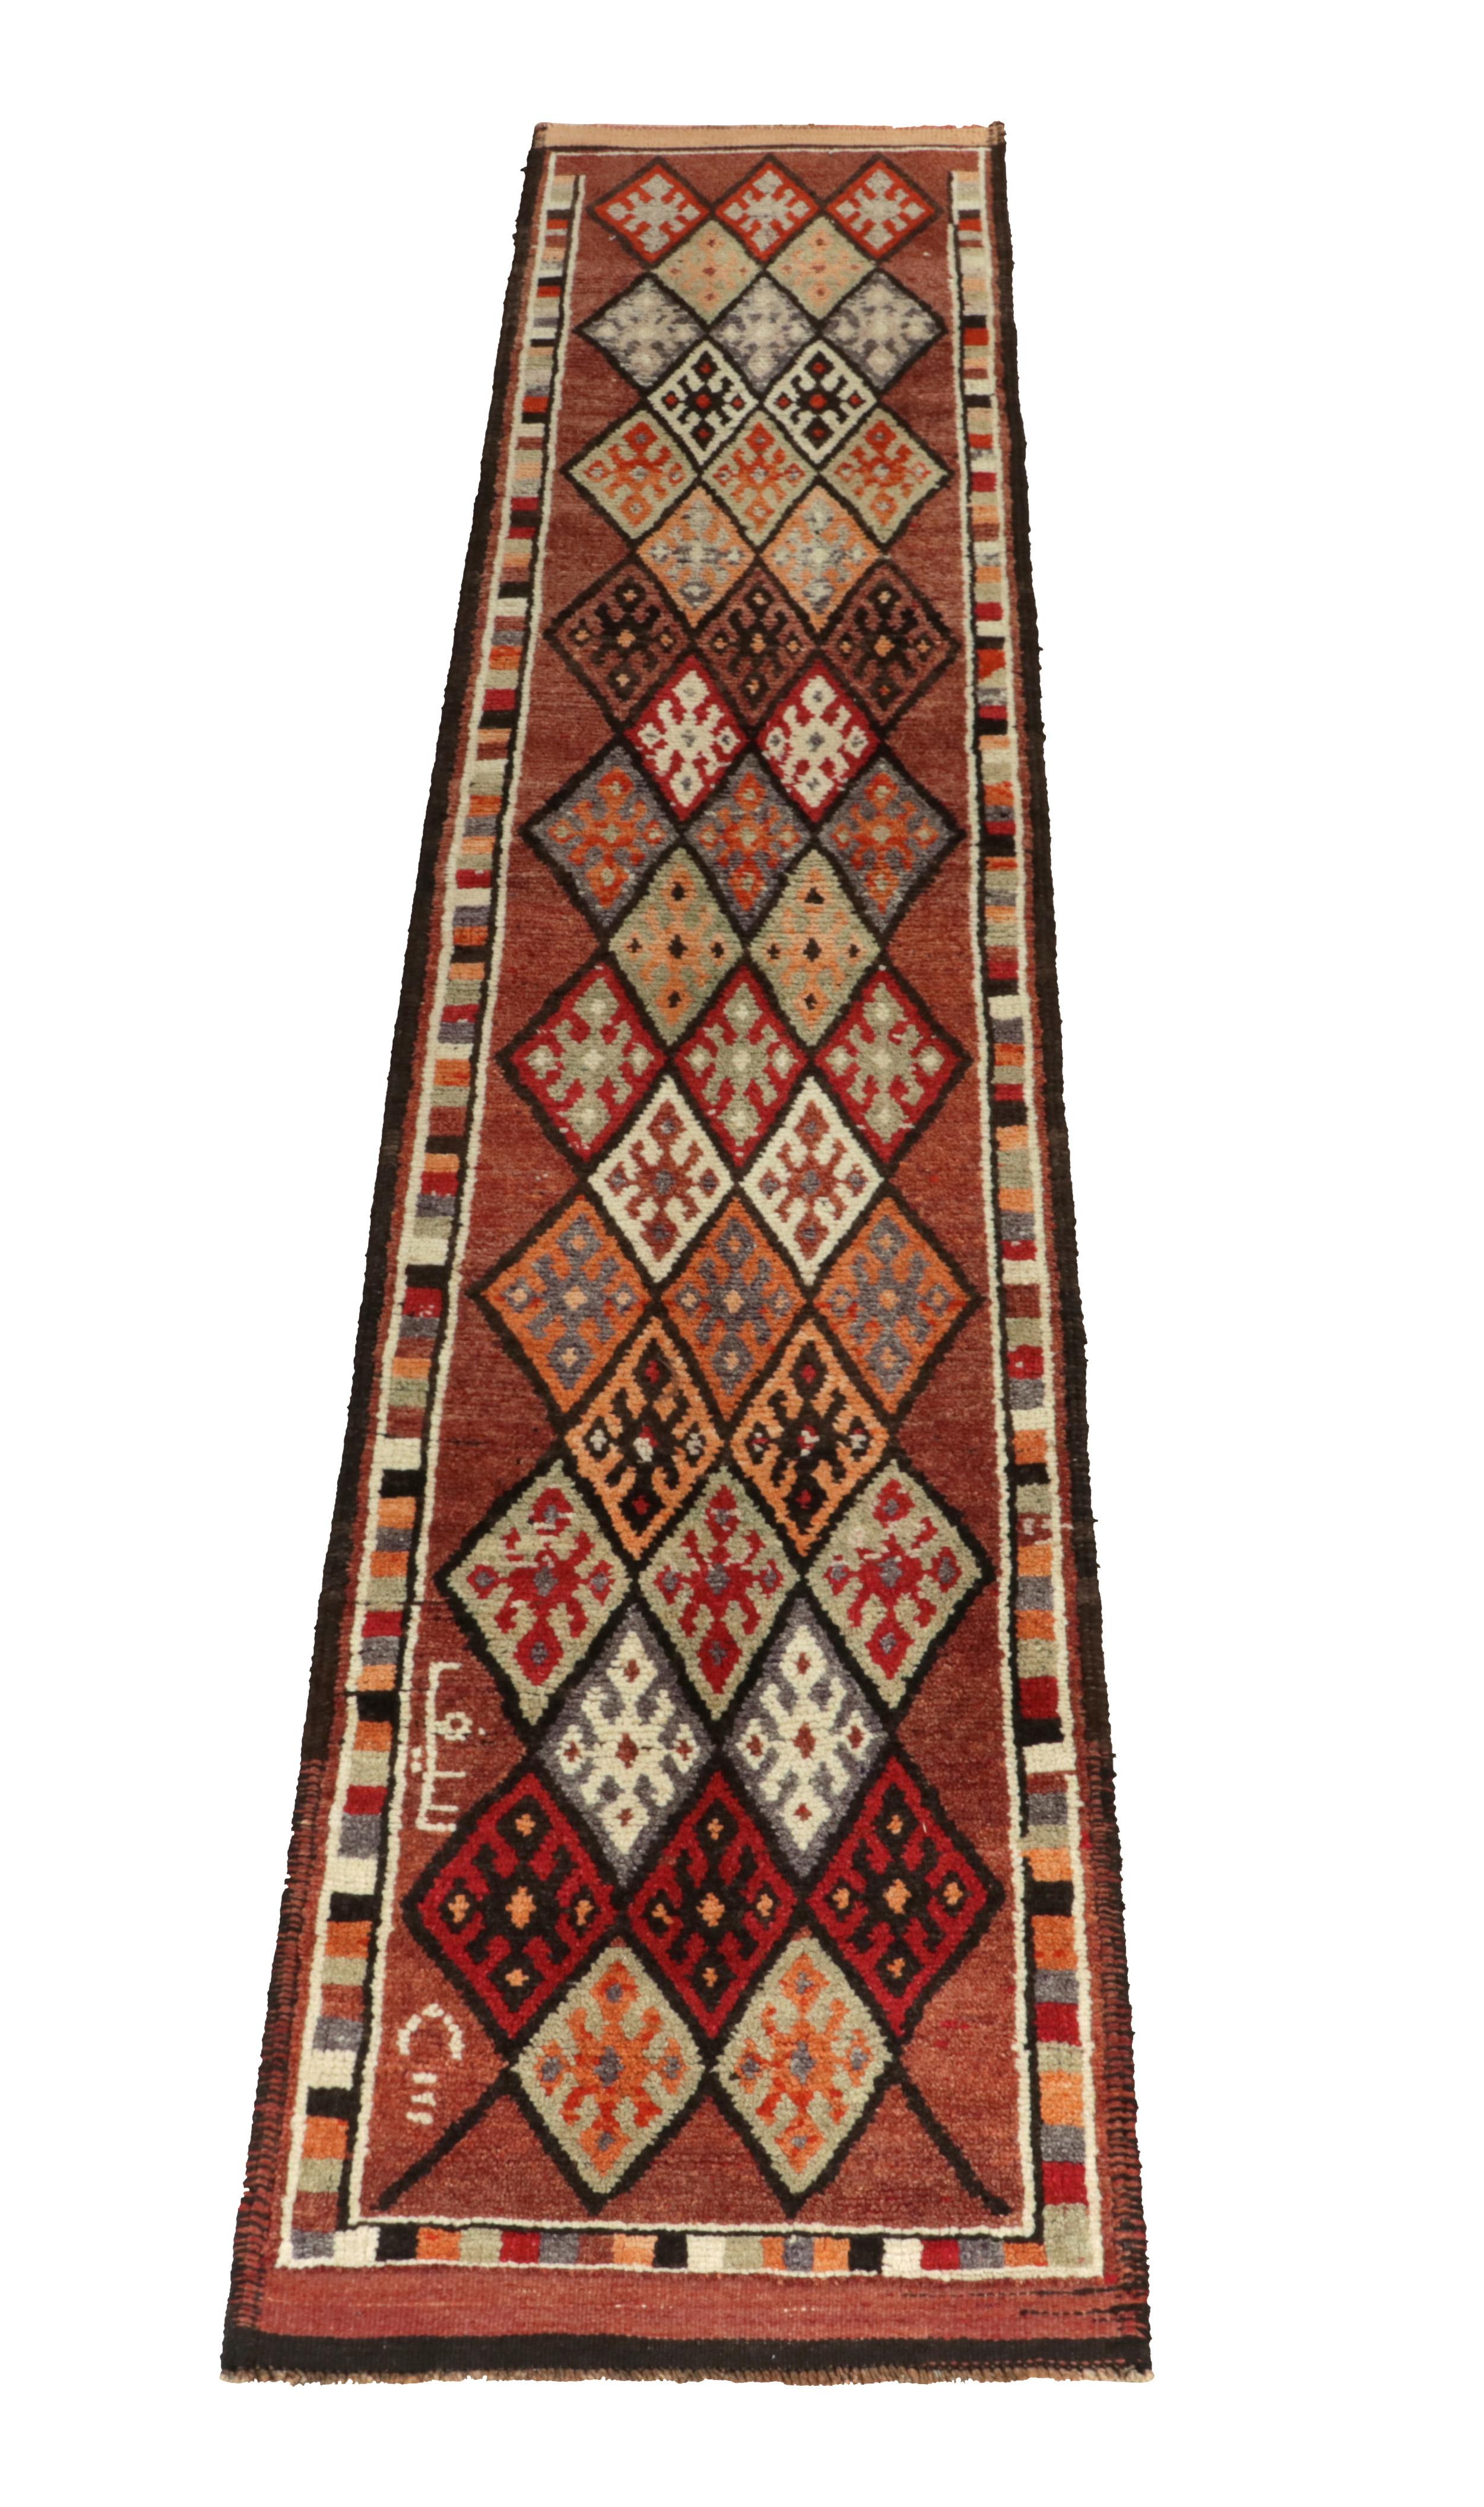 Hand-knotted in wool, a 3x13 runner from Rug & Kilim’s latest prominent curation of rare, exciting tribal rugs. 

Originating from Turkey circa 1950-1960, the design enjoys diamond patterns encasing traditional motifs in rich tones of brown,